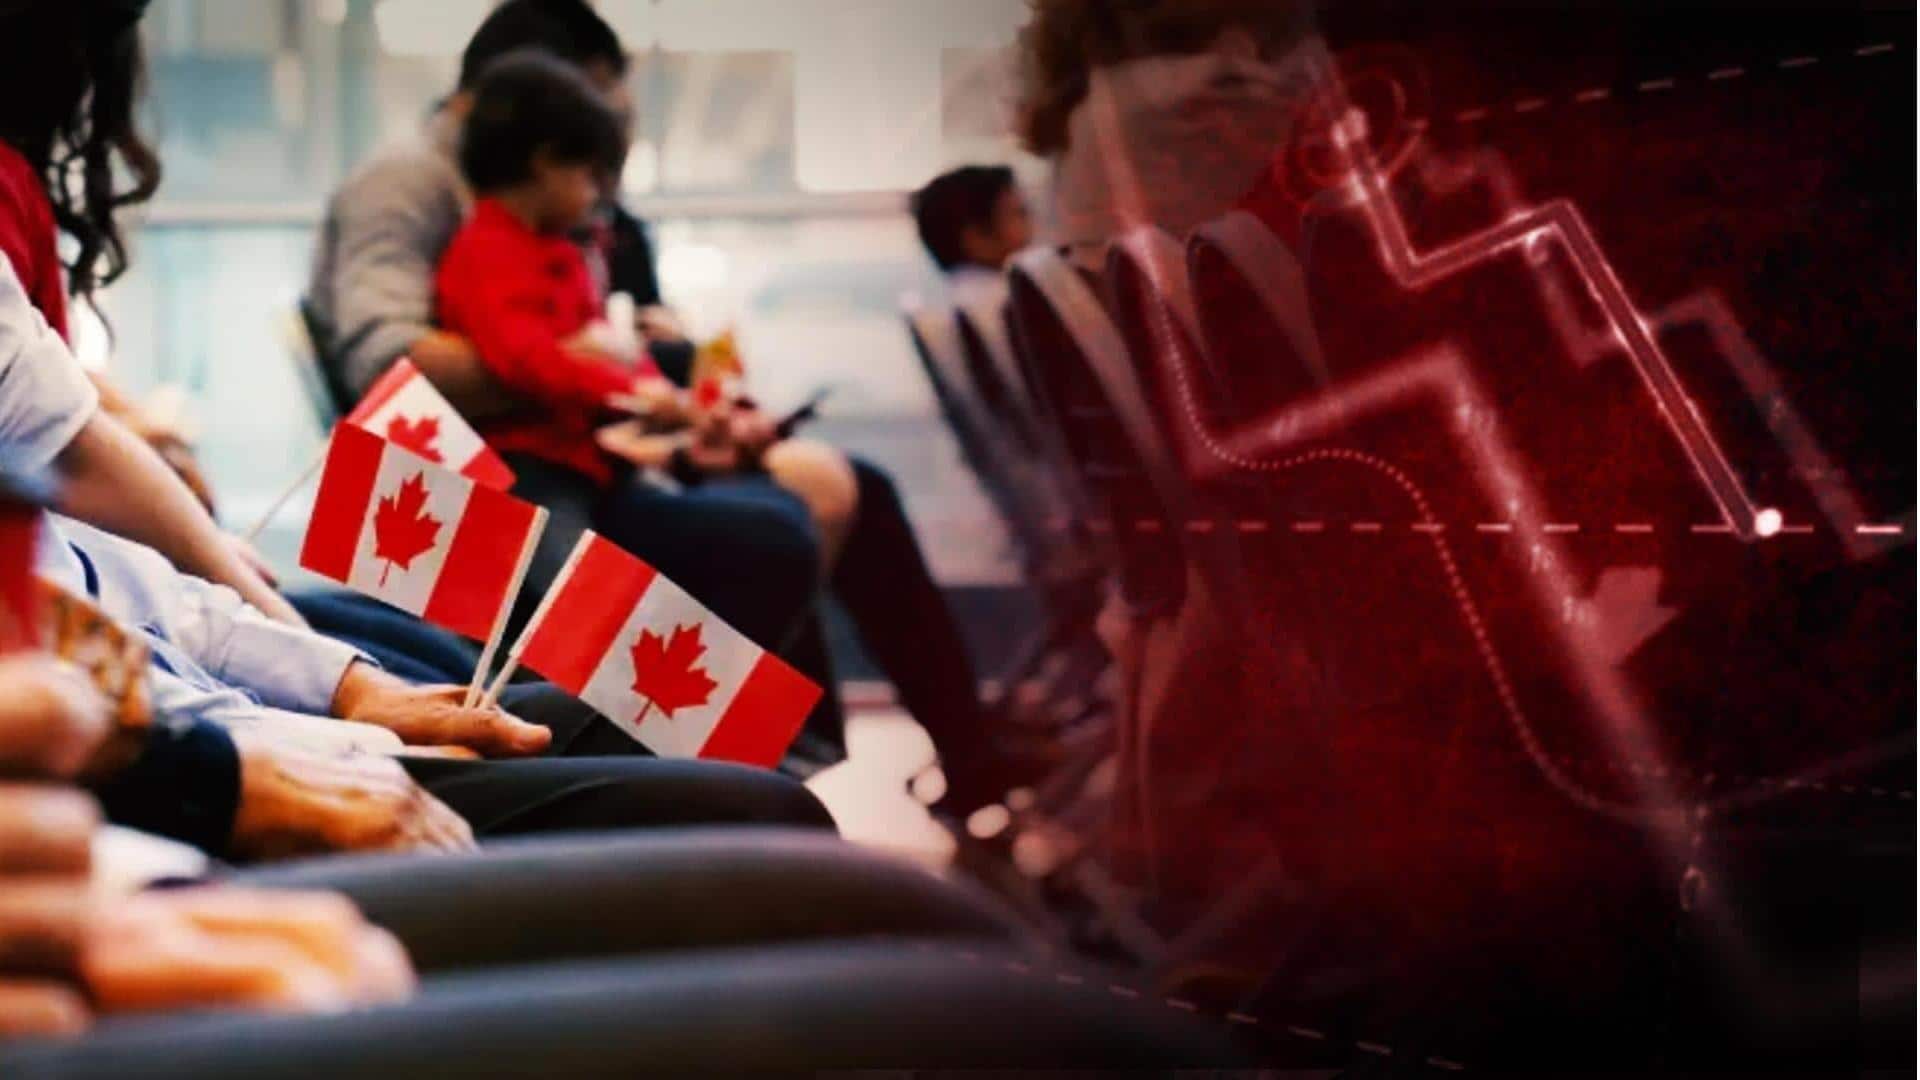 Explained: Impact of Canada's temporary work permit restrictions on Indians